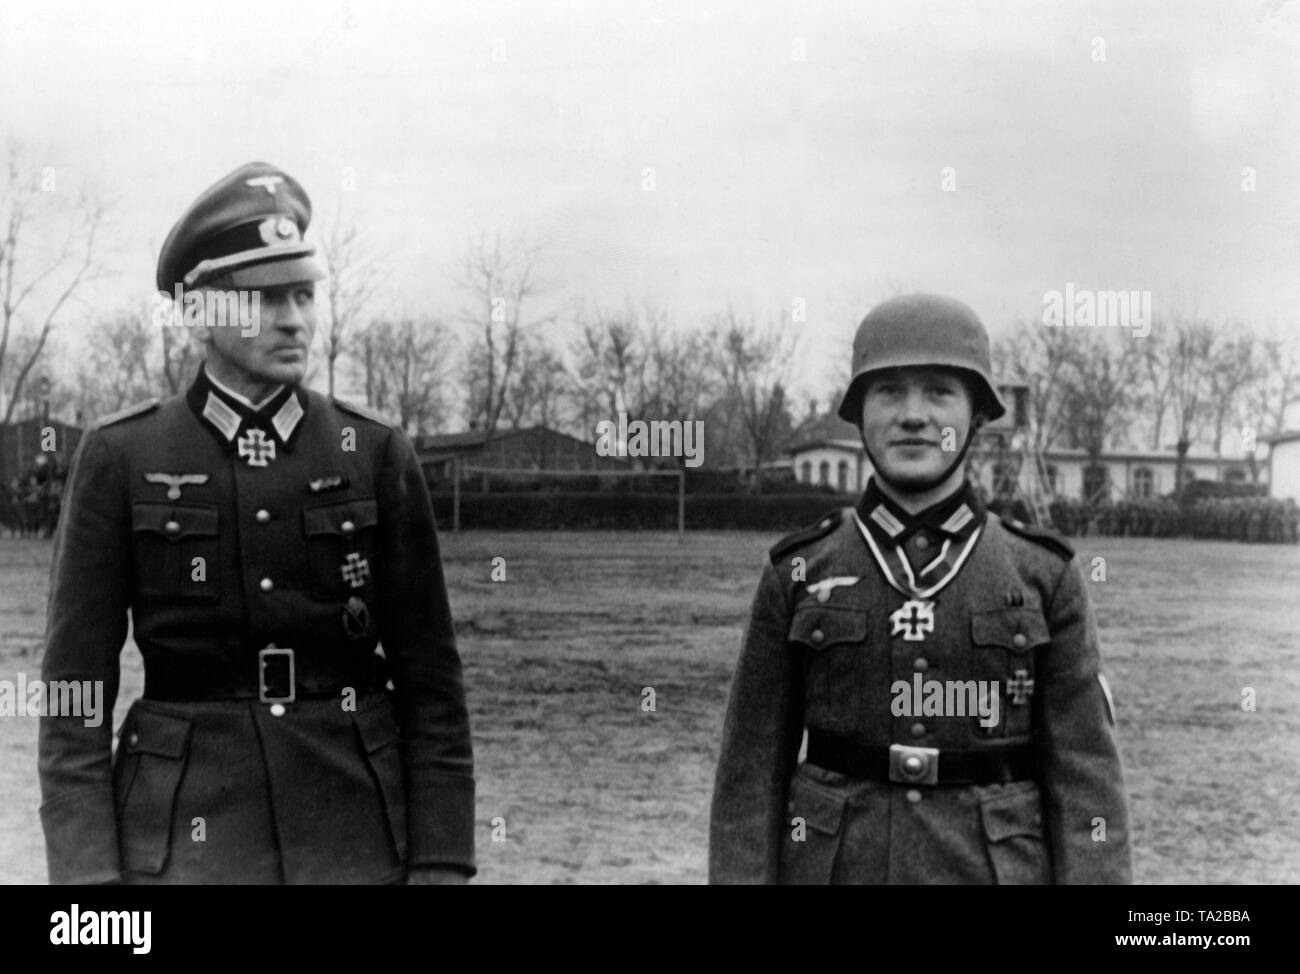 Private Hubert Brinkforth (right) after the awarding of the Knight's Cross to the Iron Cross. His battalion commander Freiherr von Hardenberg is on the left. Brinkforth was the first member of the team, who was awarded the Knight's Cross. Stock Photo